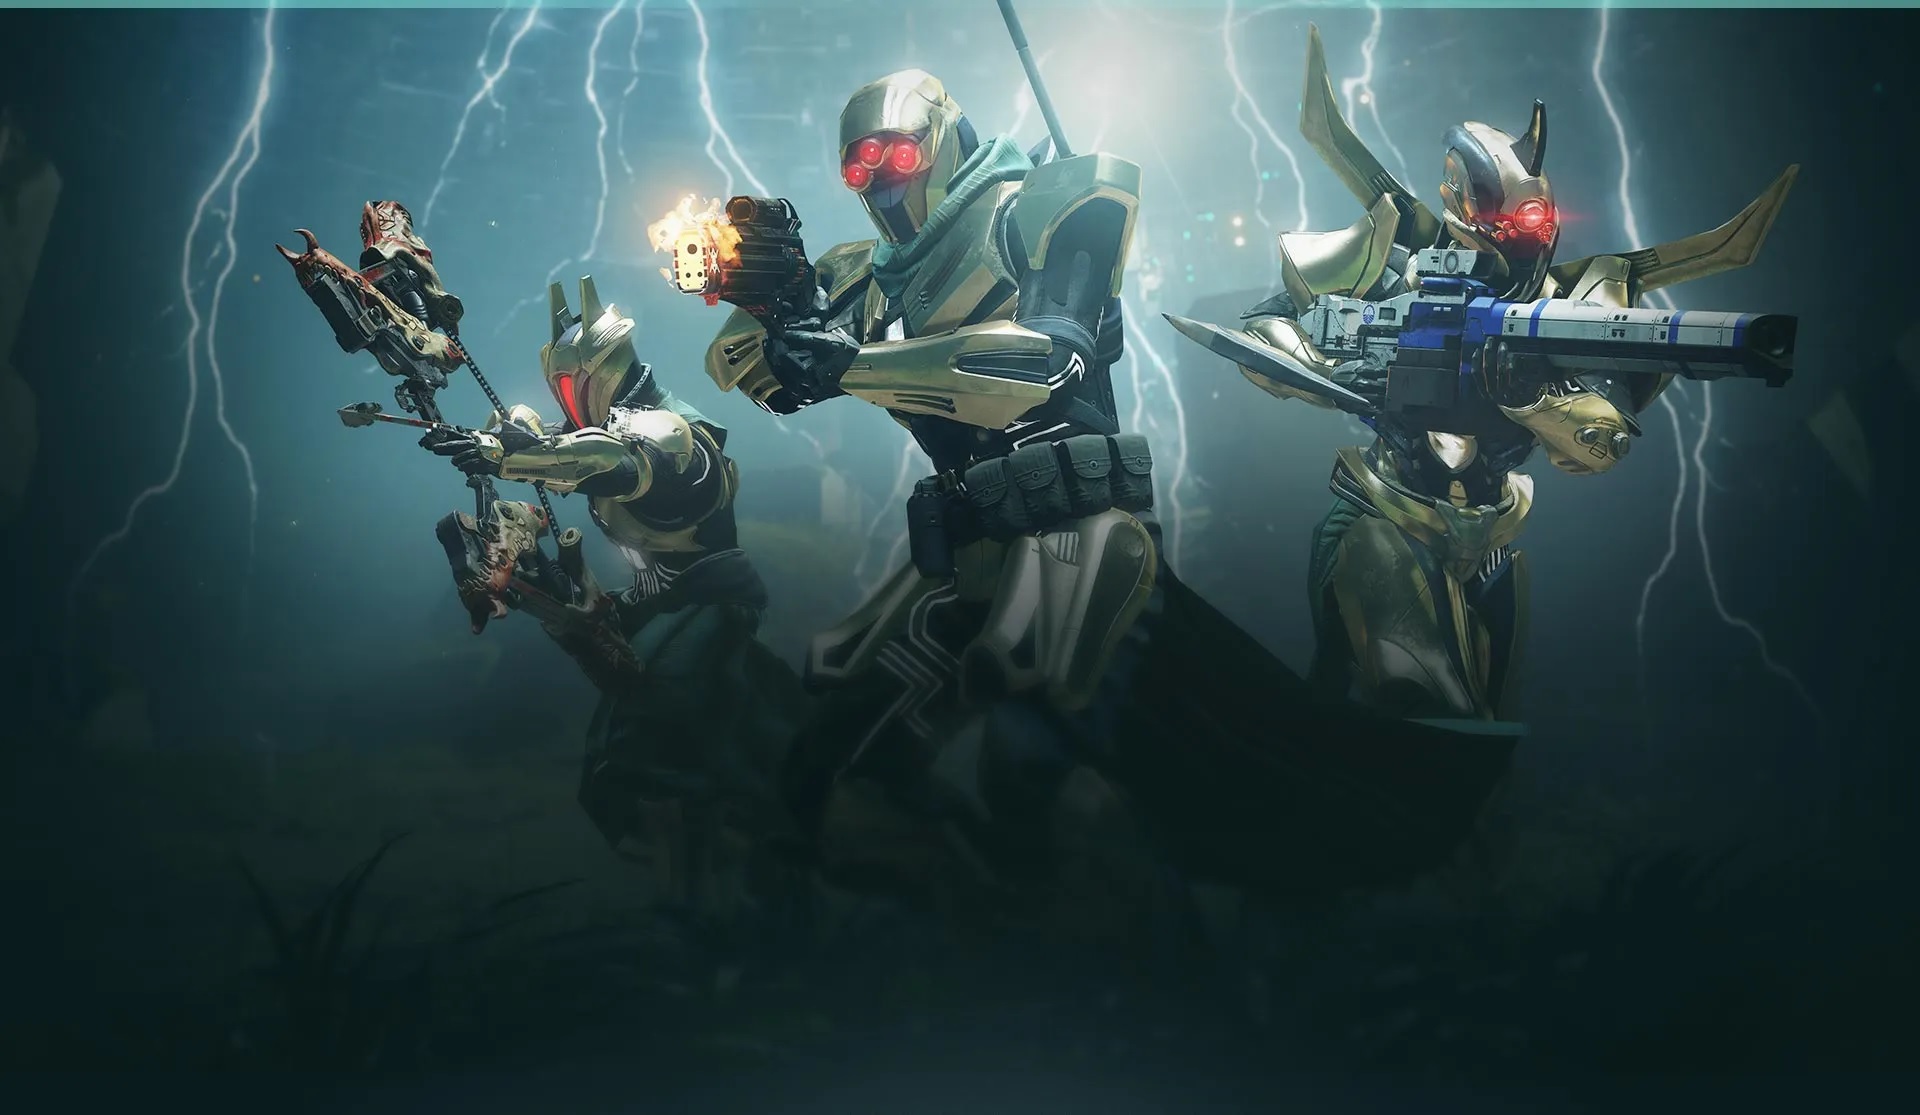 Media asset in full size related to 3dfxzone.it news item entitled as follows: Bungie pubblica un nuovo trailer del DLC Shadowkeep di Destiny 2 | Image Name: news29920_Destiny-2-Shadowkeep_2.jpg